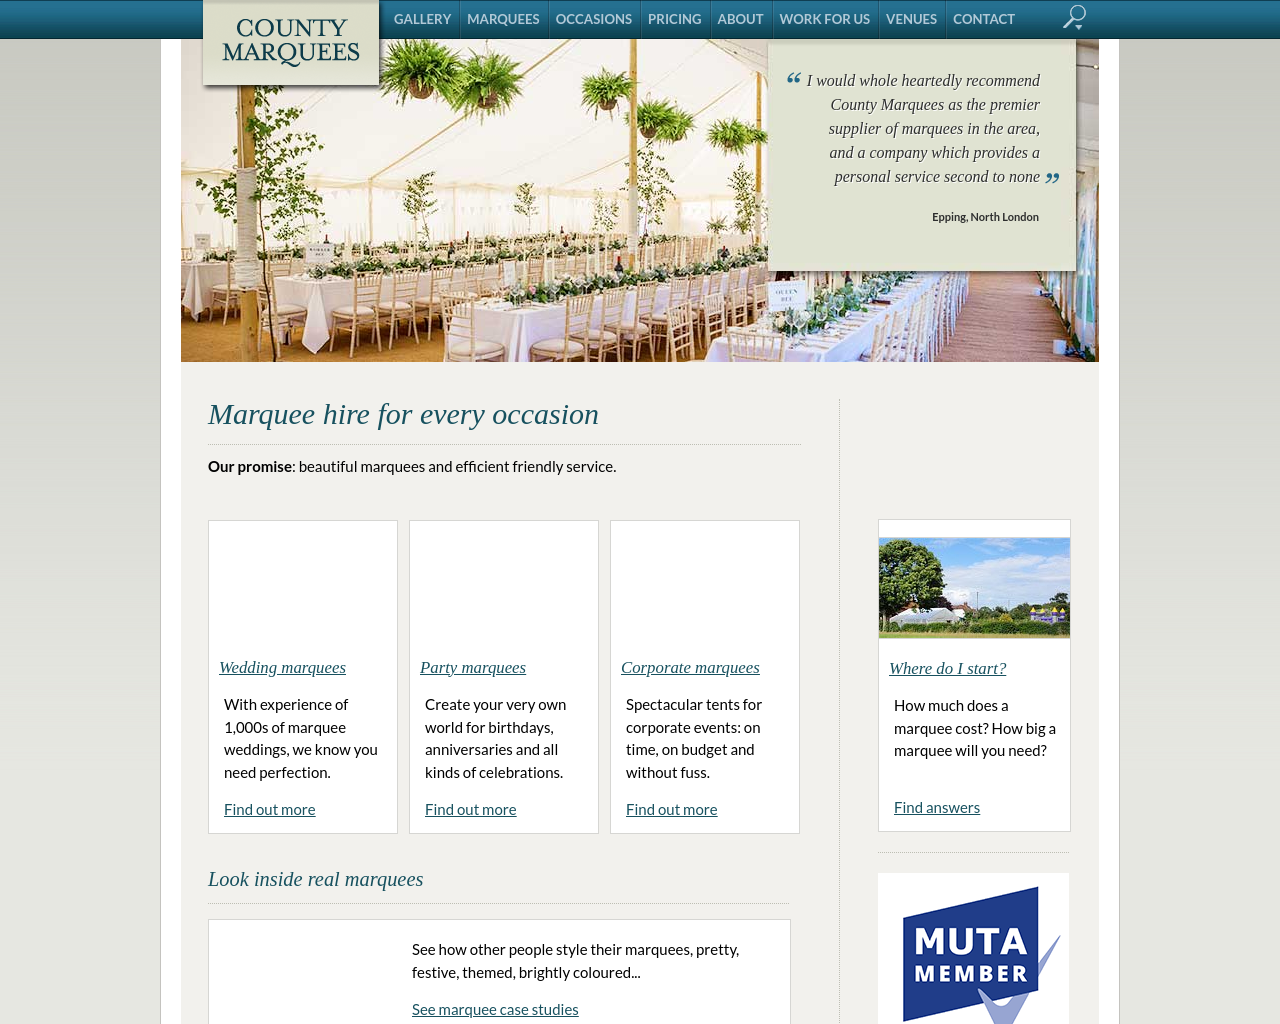 countymarquees.com